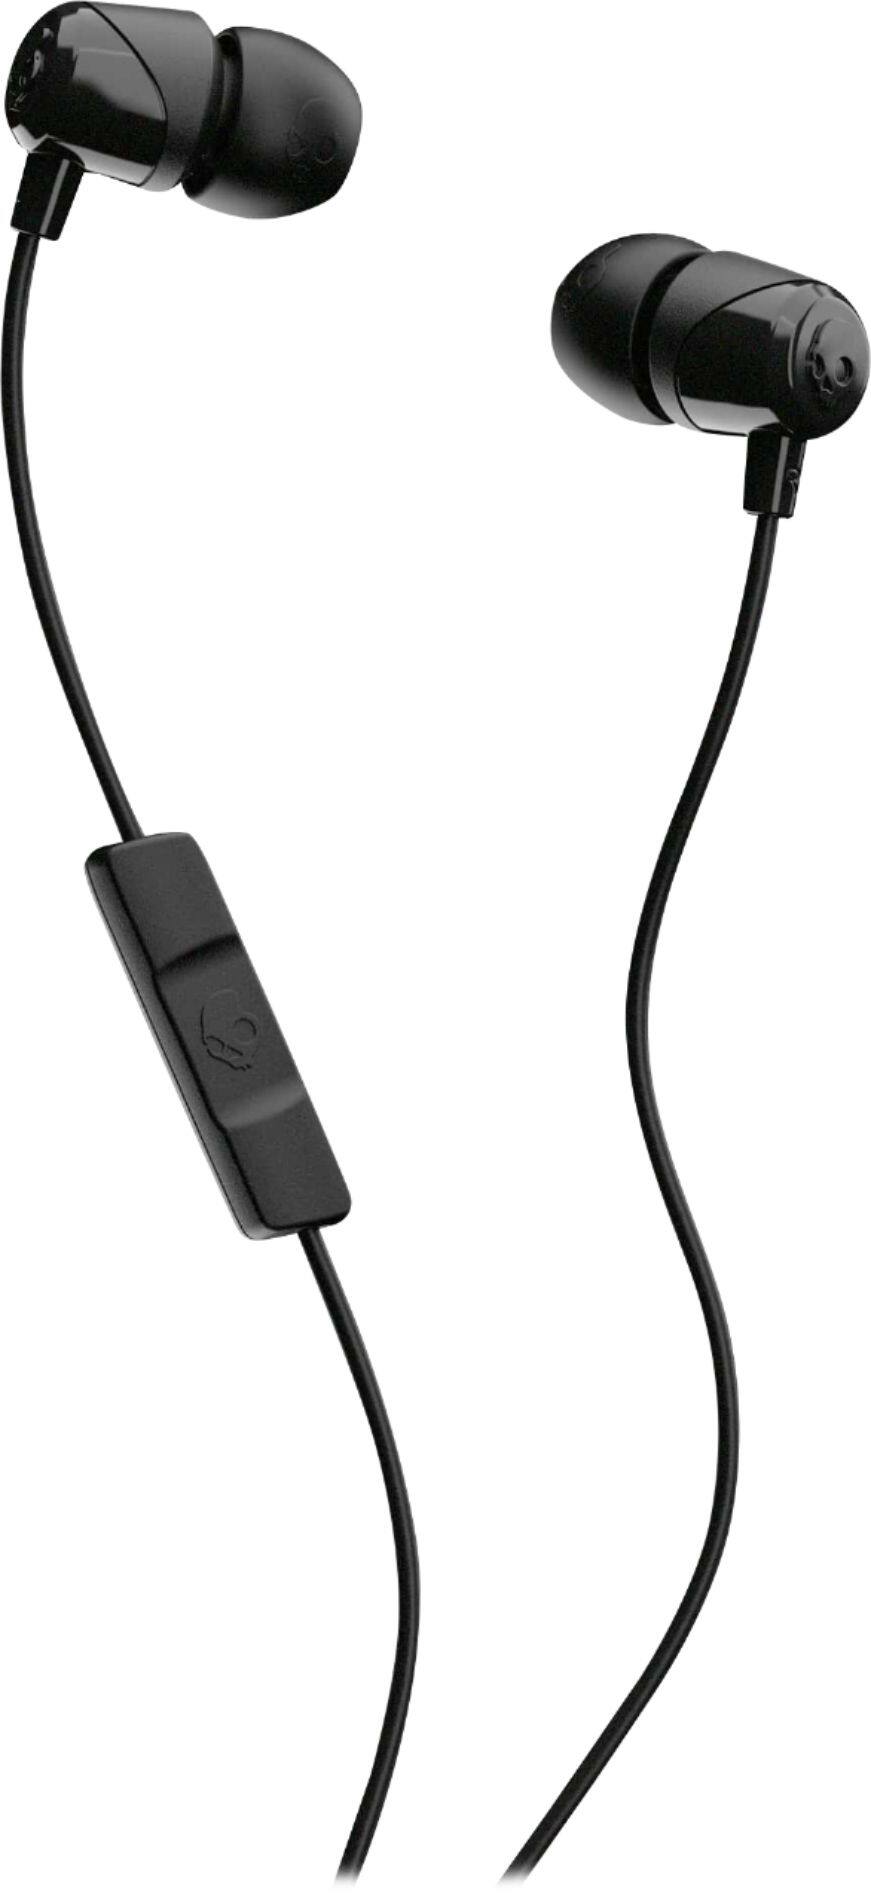 Skullcandy Jib Earbuds with Microphone, Noise Isolating Fit, Call and Track Control, In-Ear (SK-S2DUYK-441)